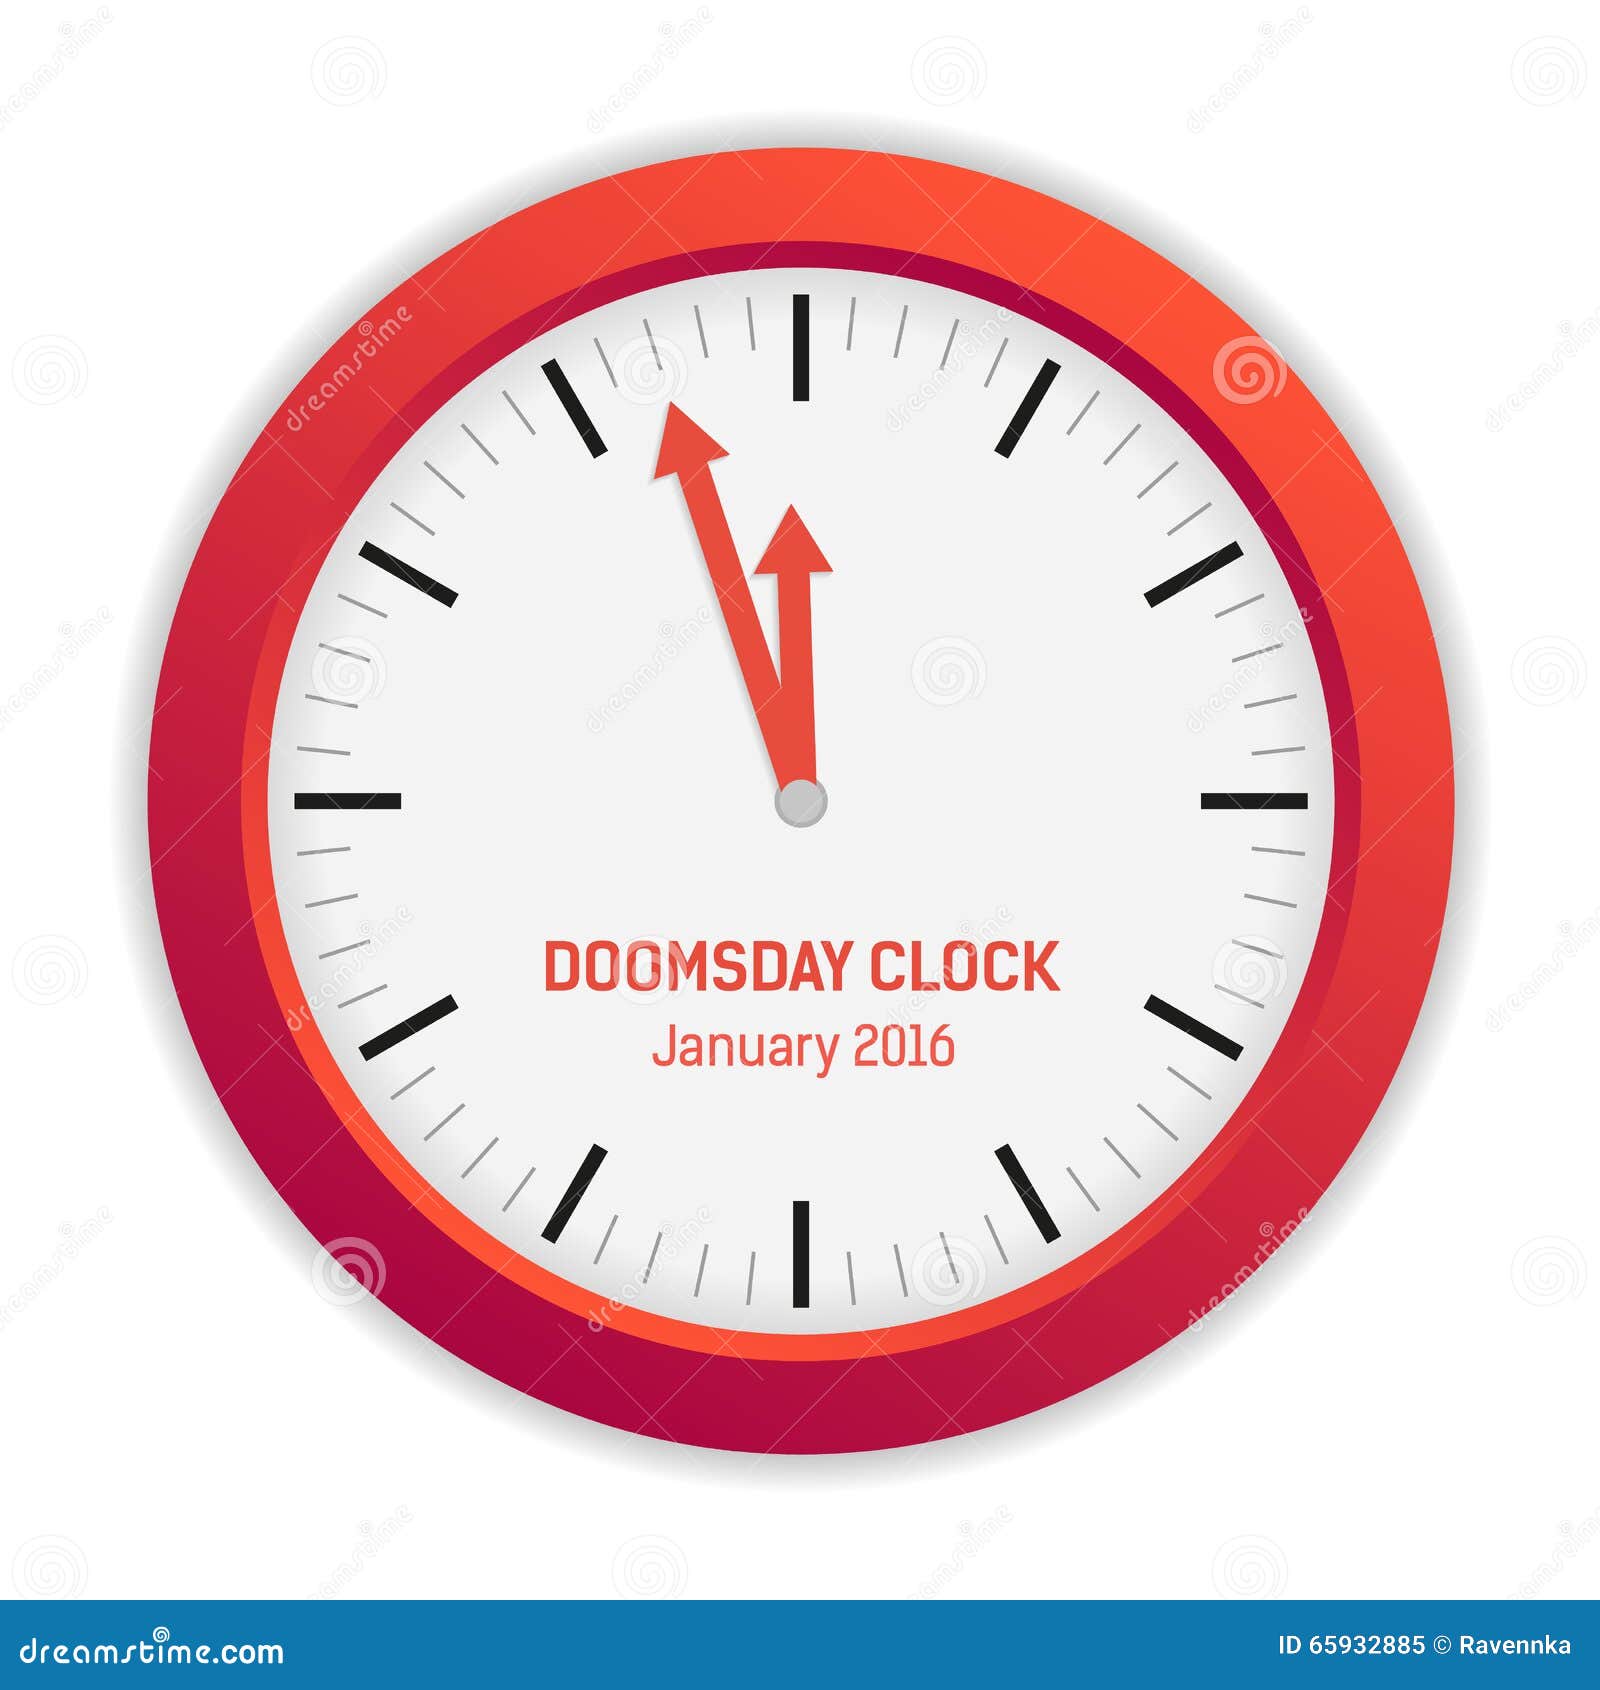 Isolated Illustration Of Doomsday Clock (3 Minutes To Midnight) Stock Vector - Image ...1300 x 1390